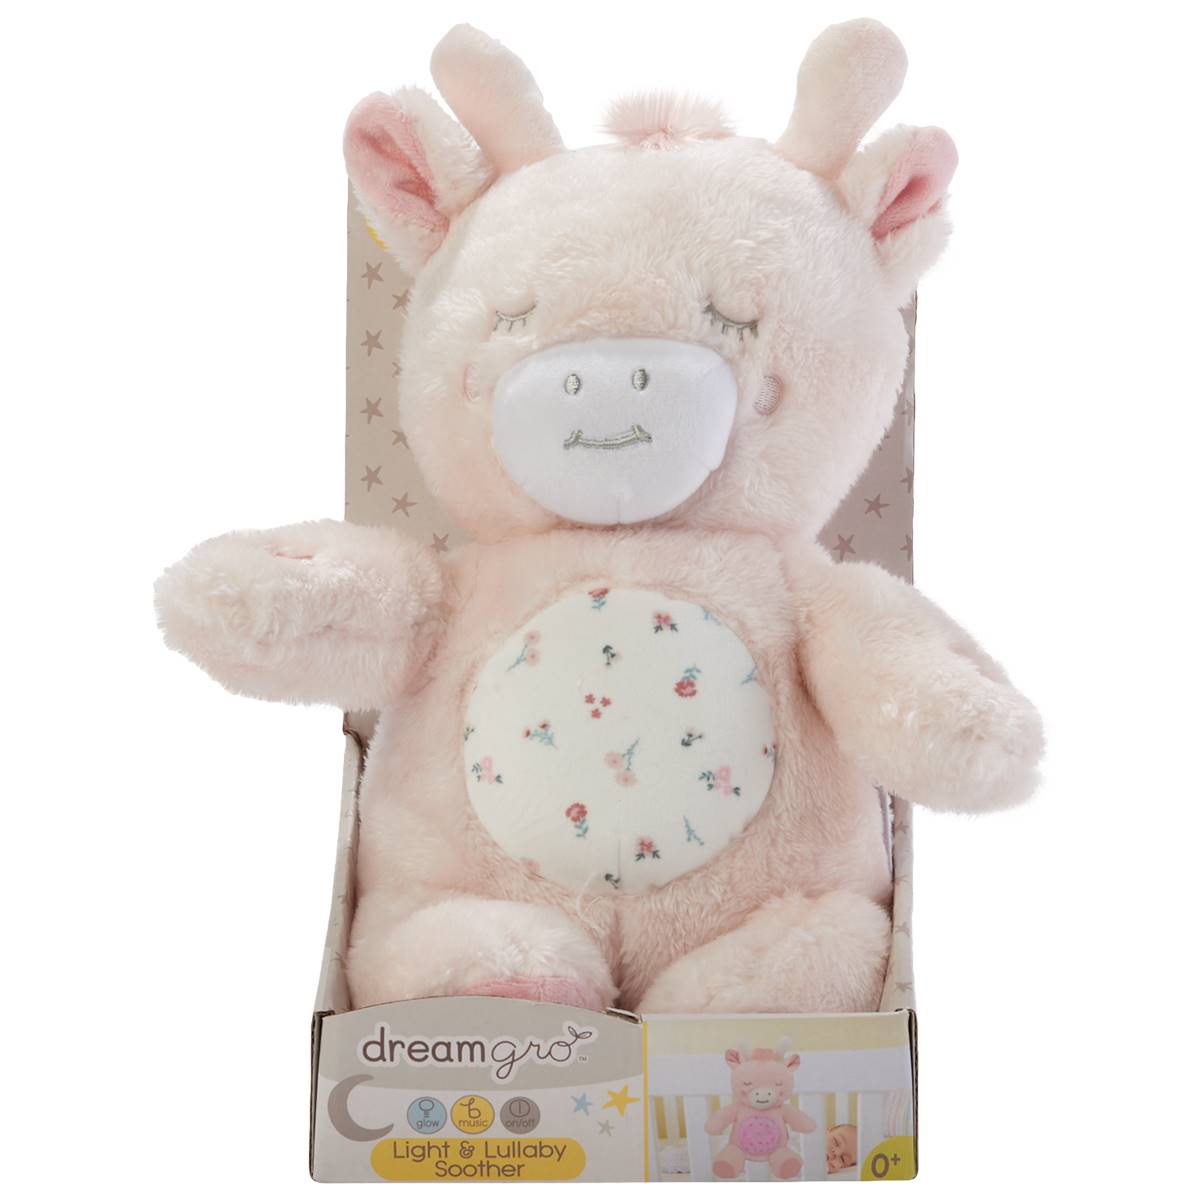 DreamGro(R) Plush Giraffe Light & Lullaby Soother